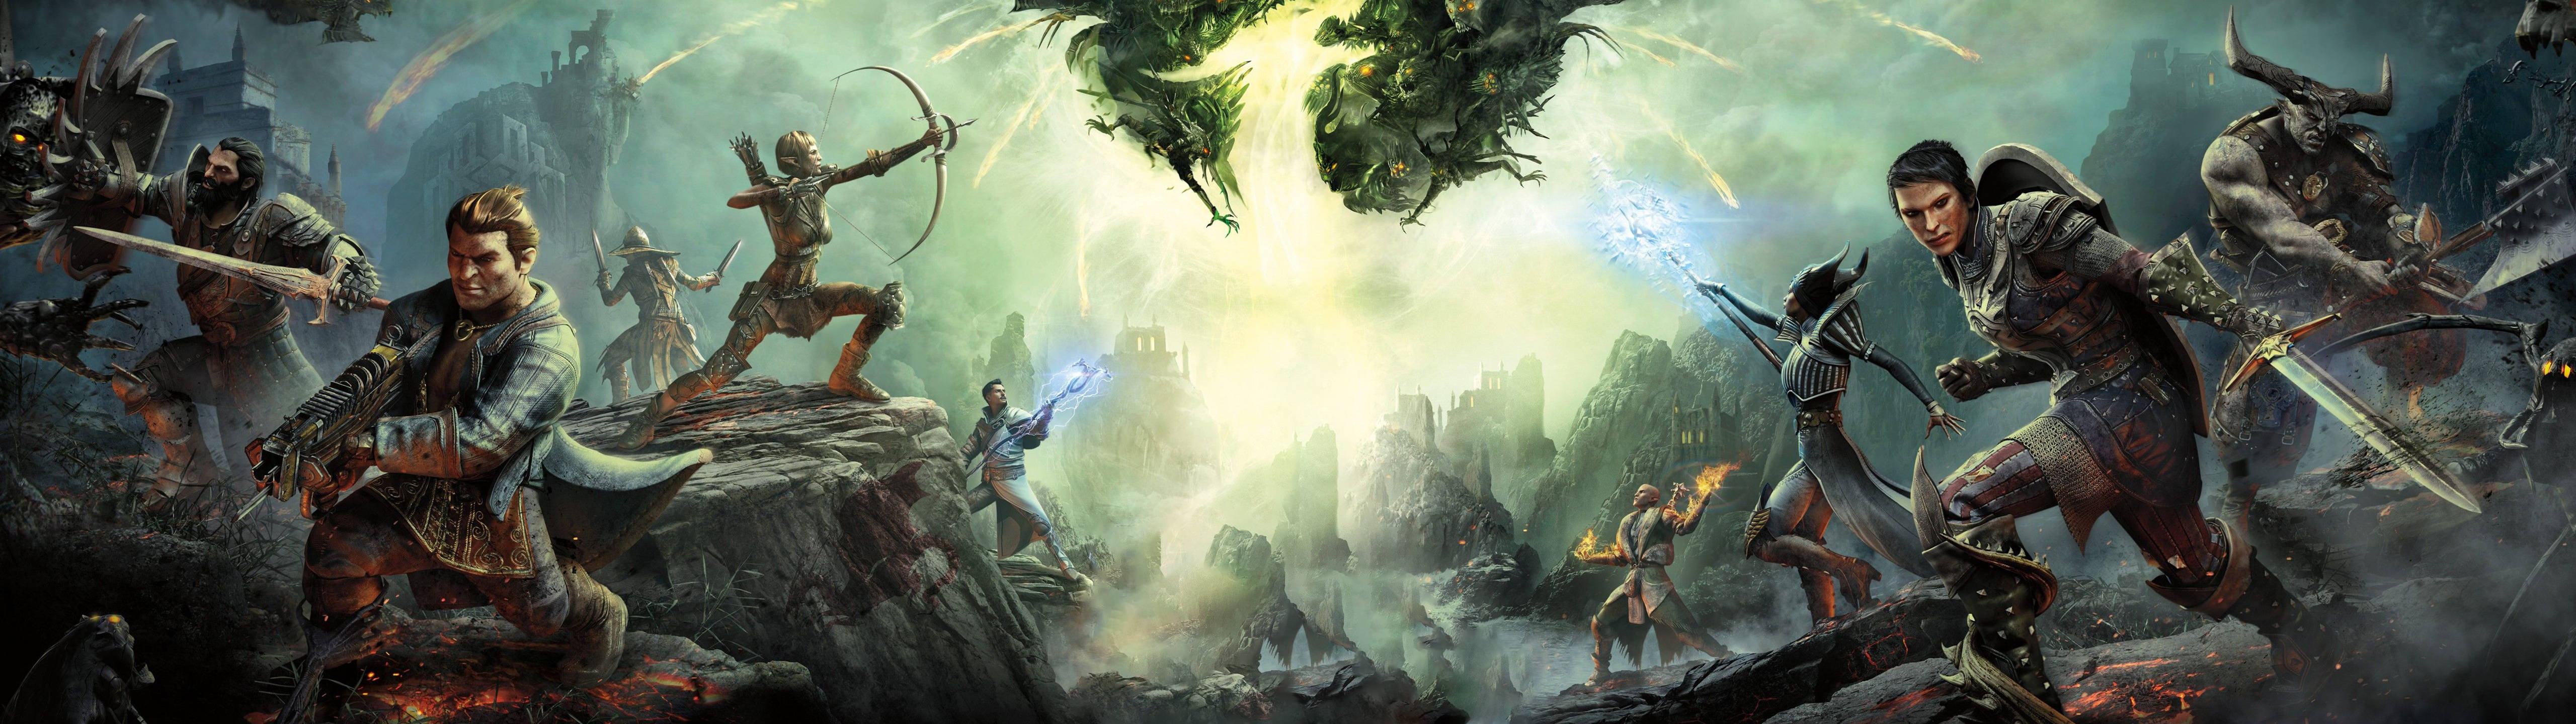 5120x1440 Game Dragon Age Inquisition